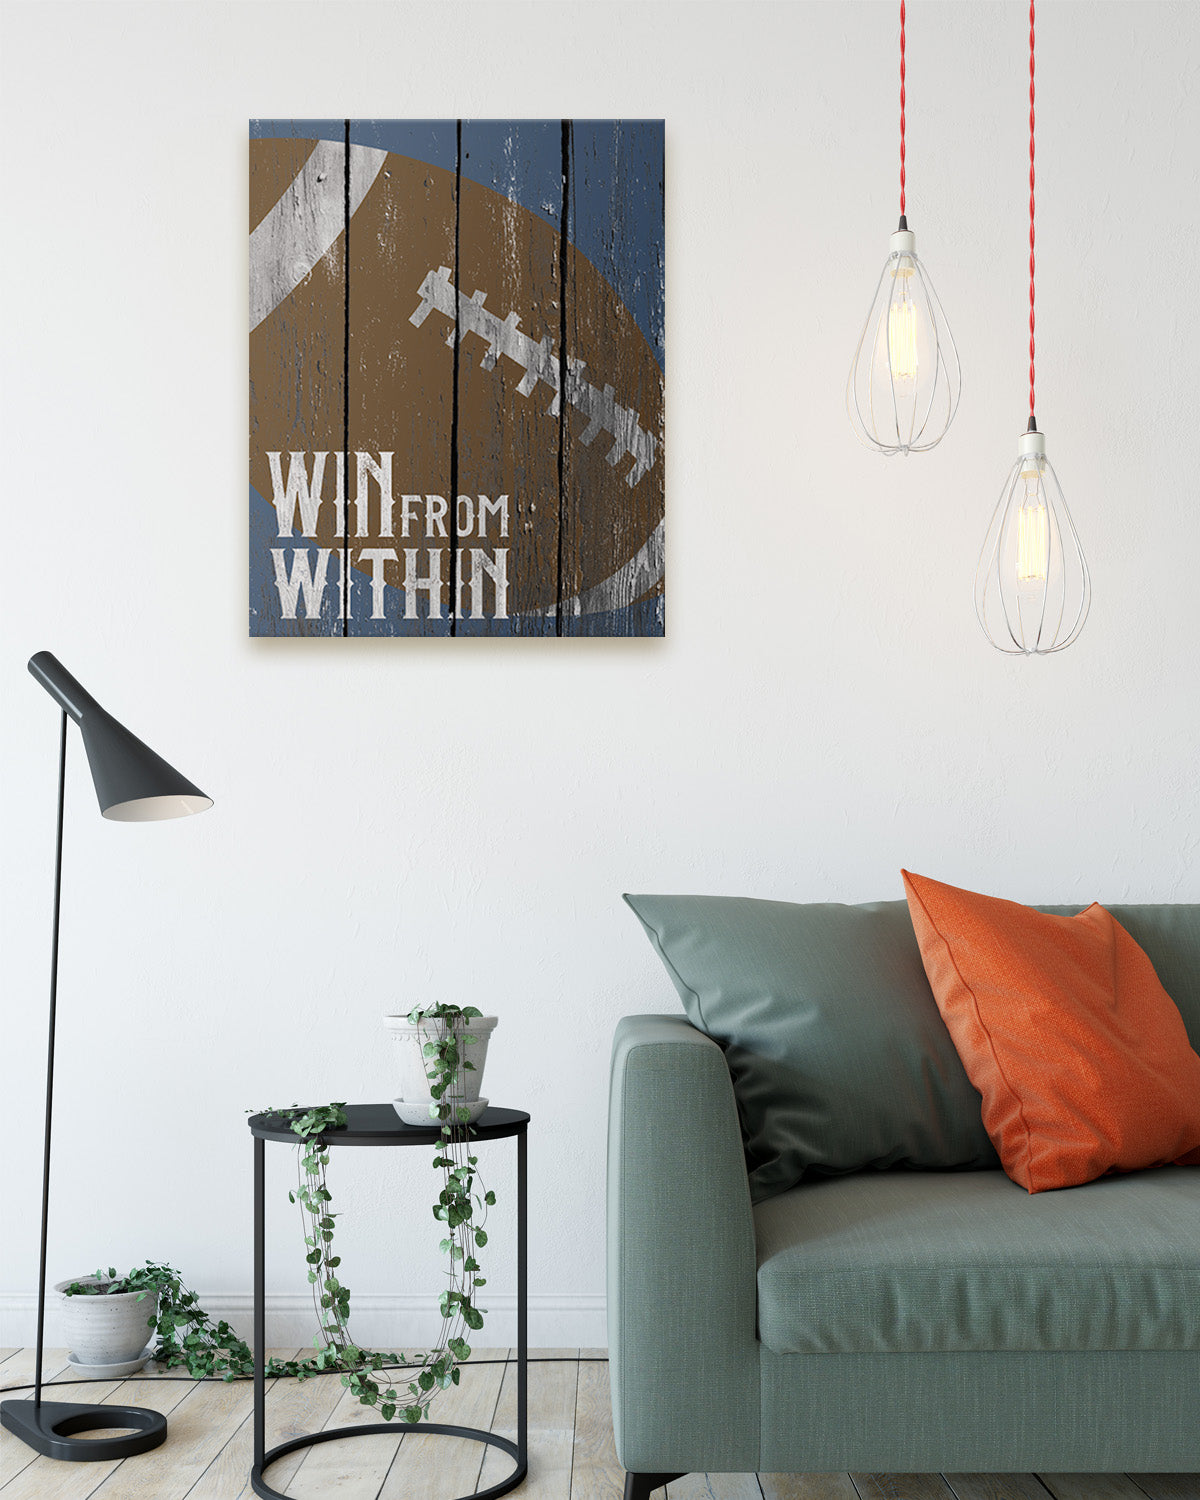 Win from Within - Wall Decor Art Print - Great gift for football fans - Poster & Canvas Sizes